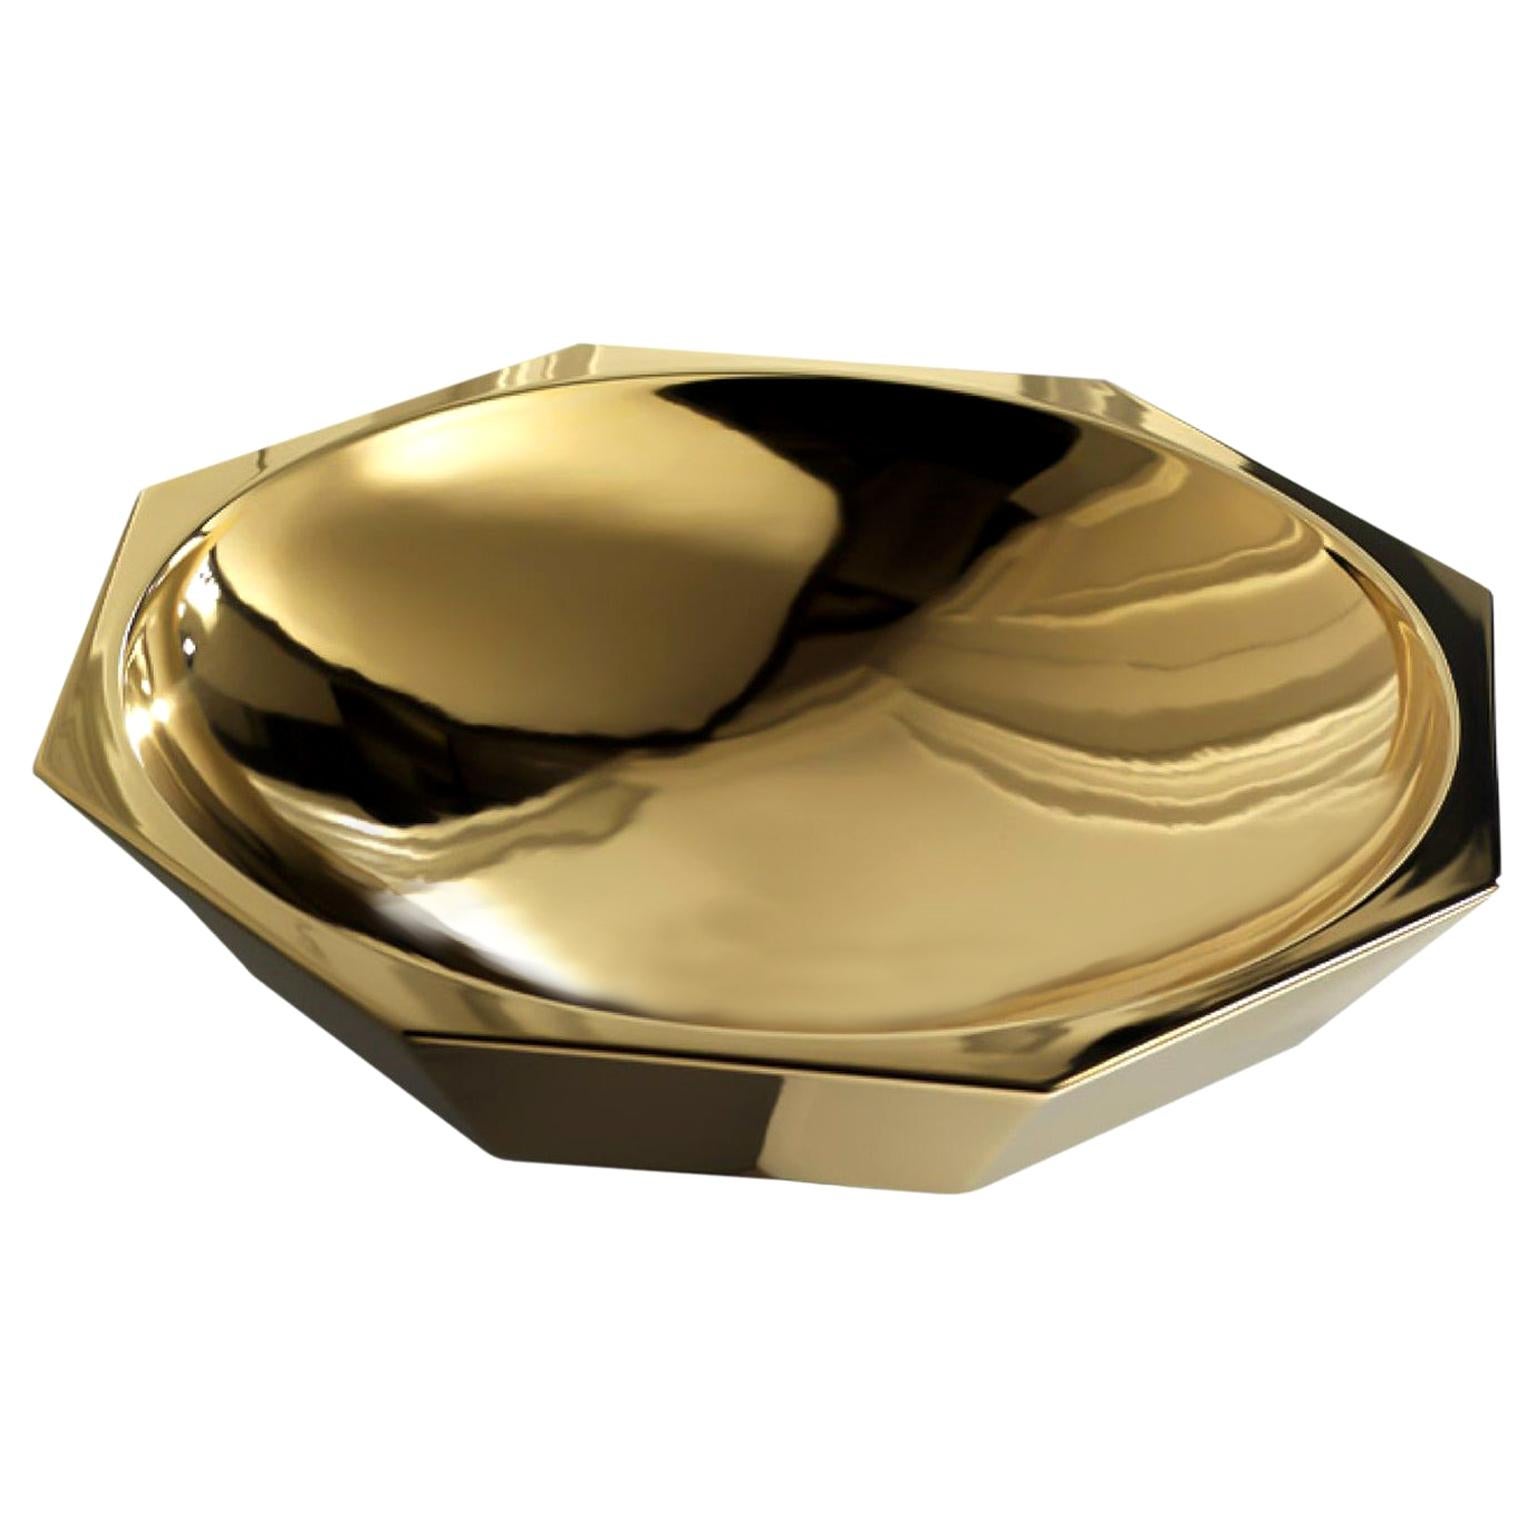 Ceramic Bowl "CLIO" Handcrafted in 24-Karat Gold by Gabriella B. Made in Italy For Sale